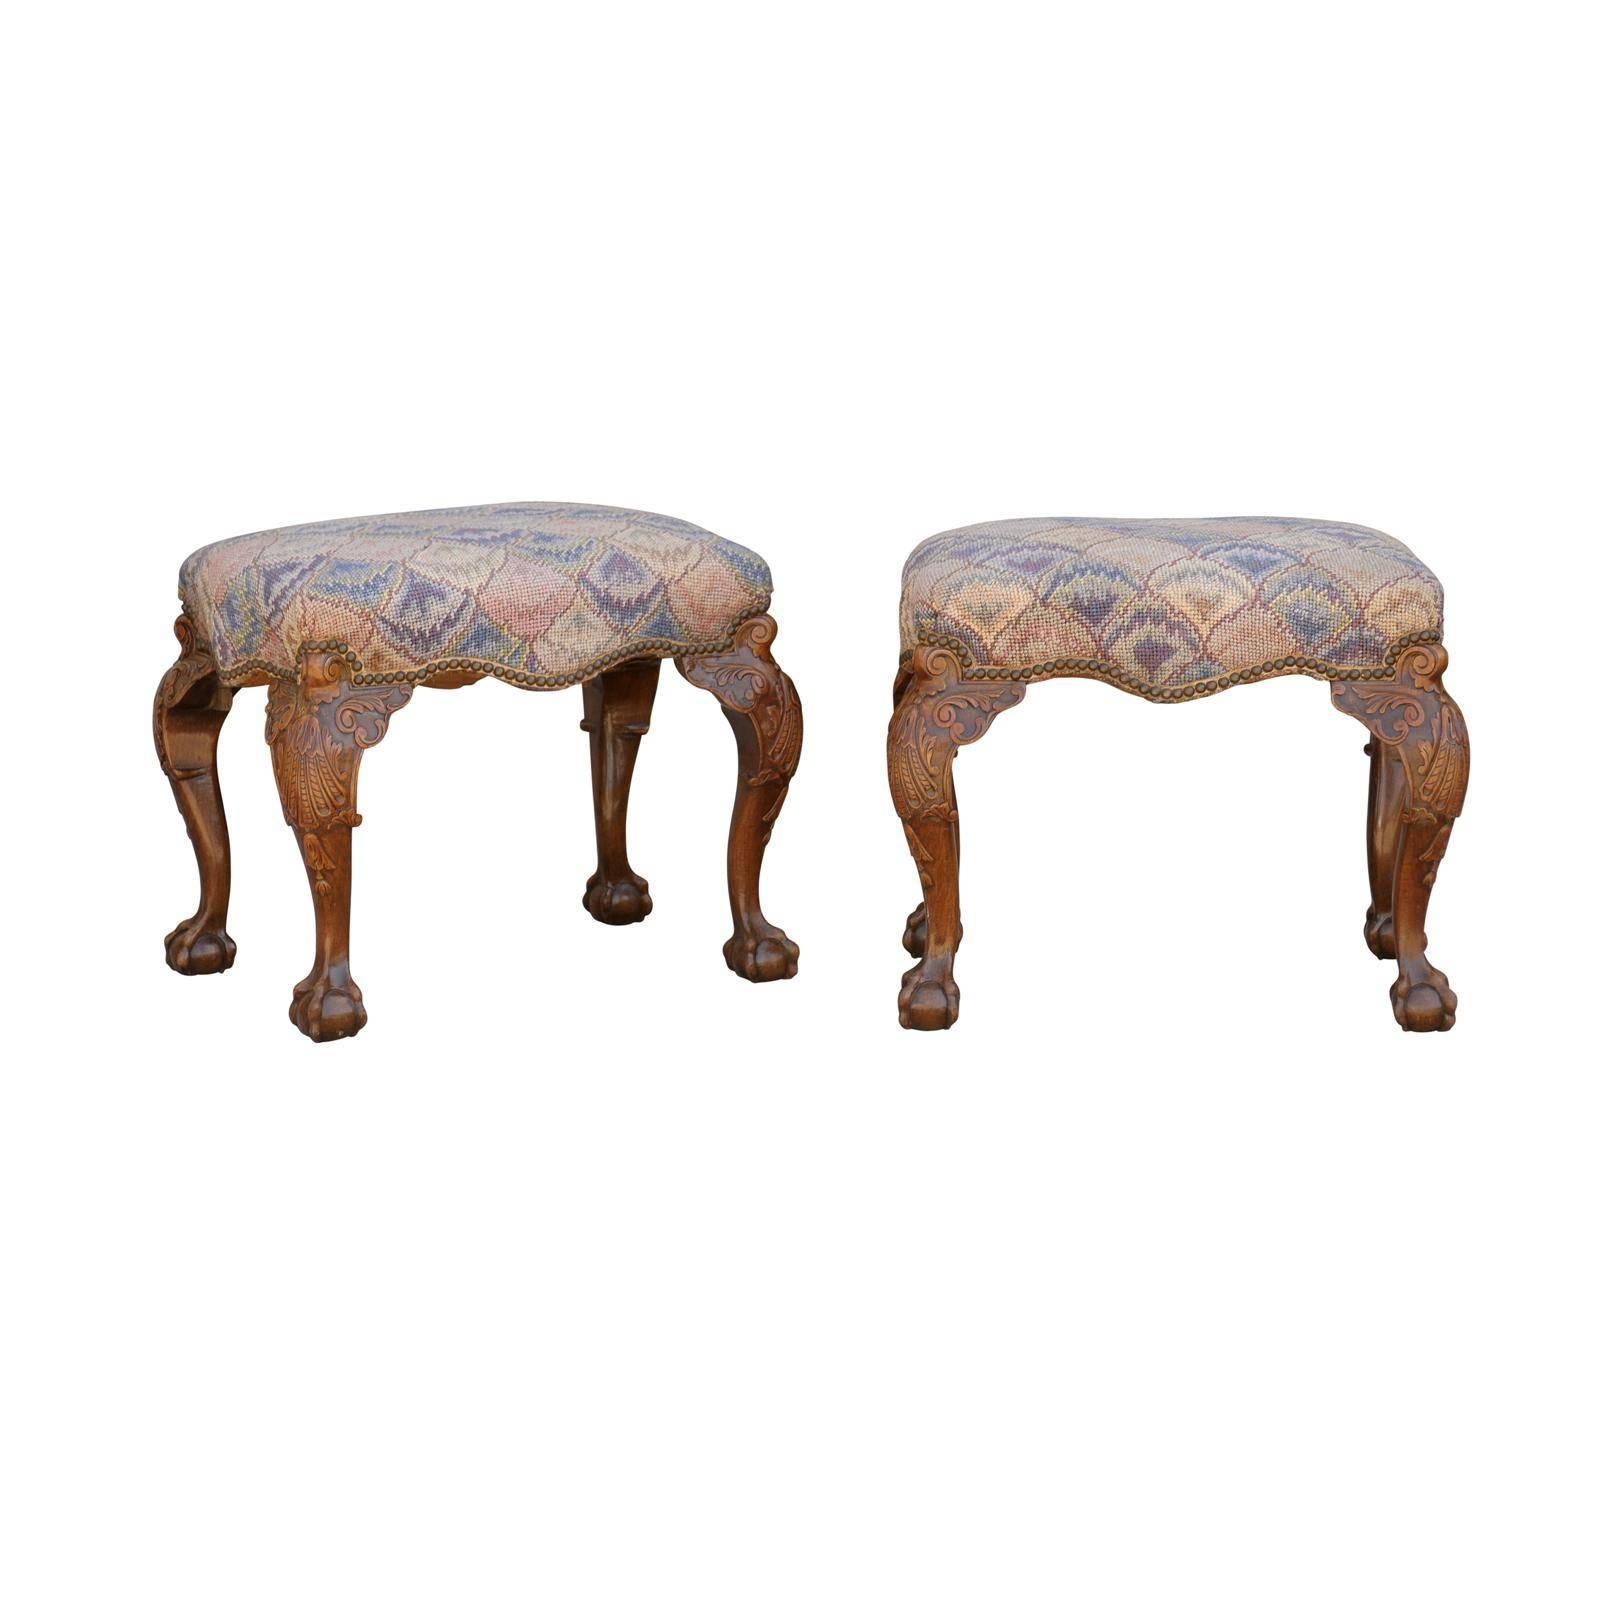 Pair of English Needlepoint Upholstered Stools with Carved Cabriole Legs